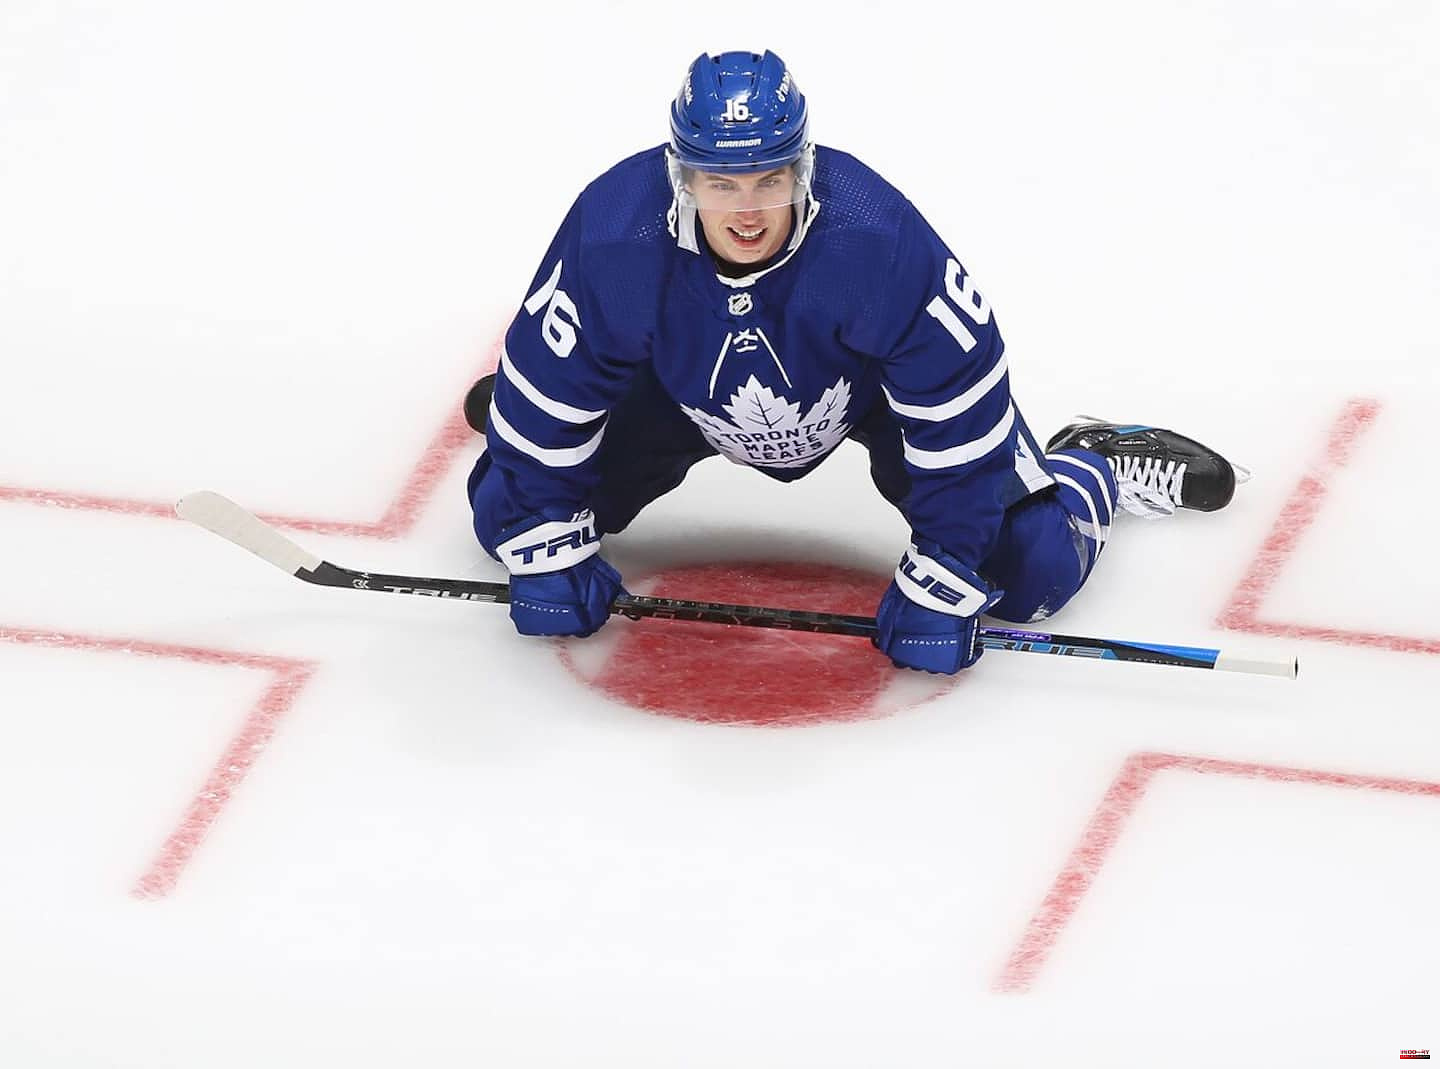 Car theft: Marner thanks supporters for their support